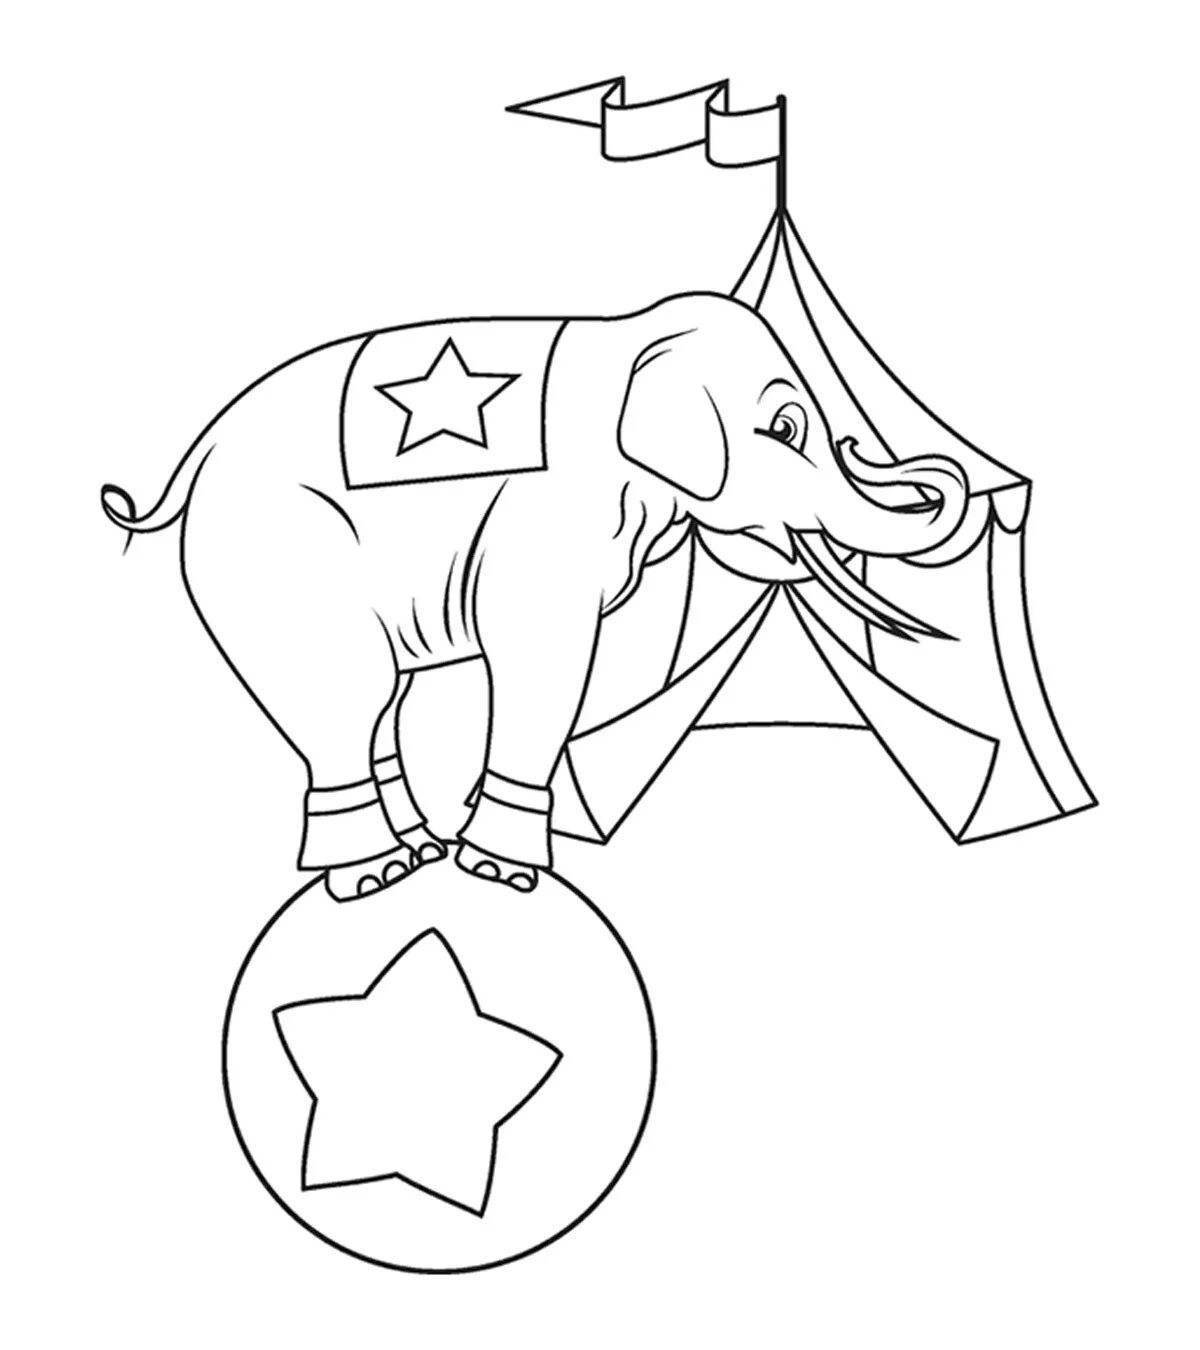 Coloring page wonderful circus elephant